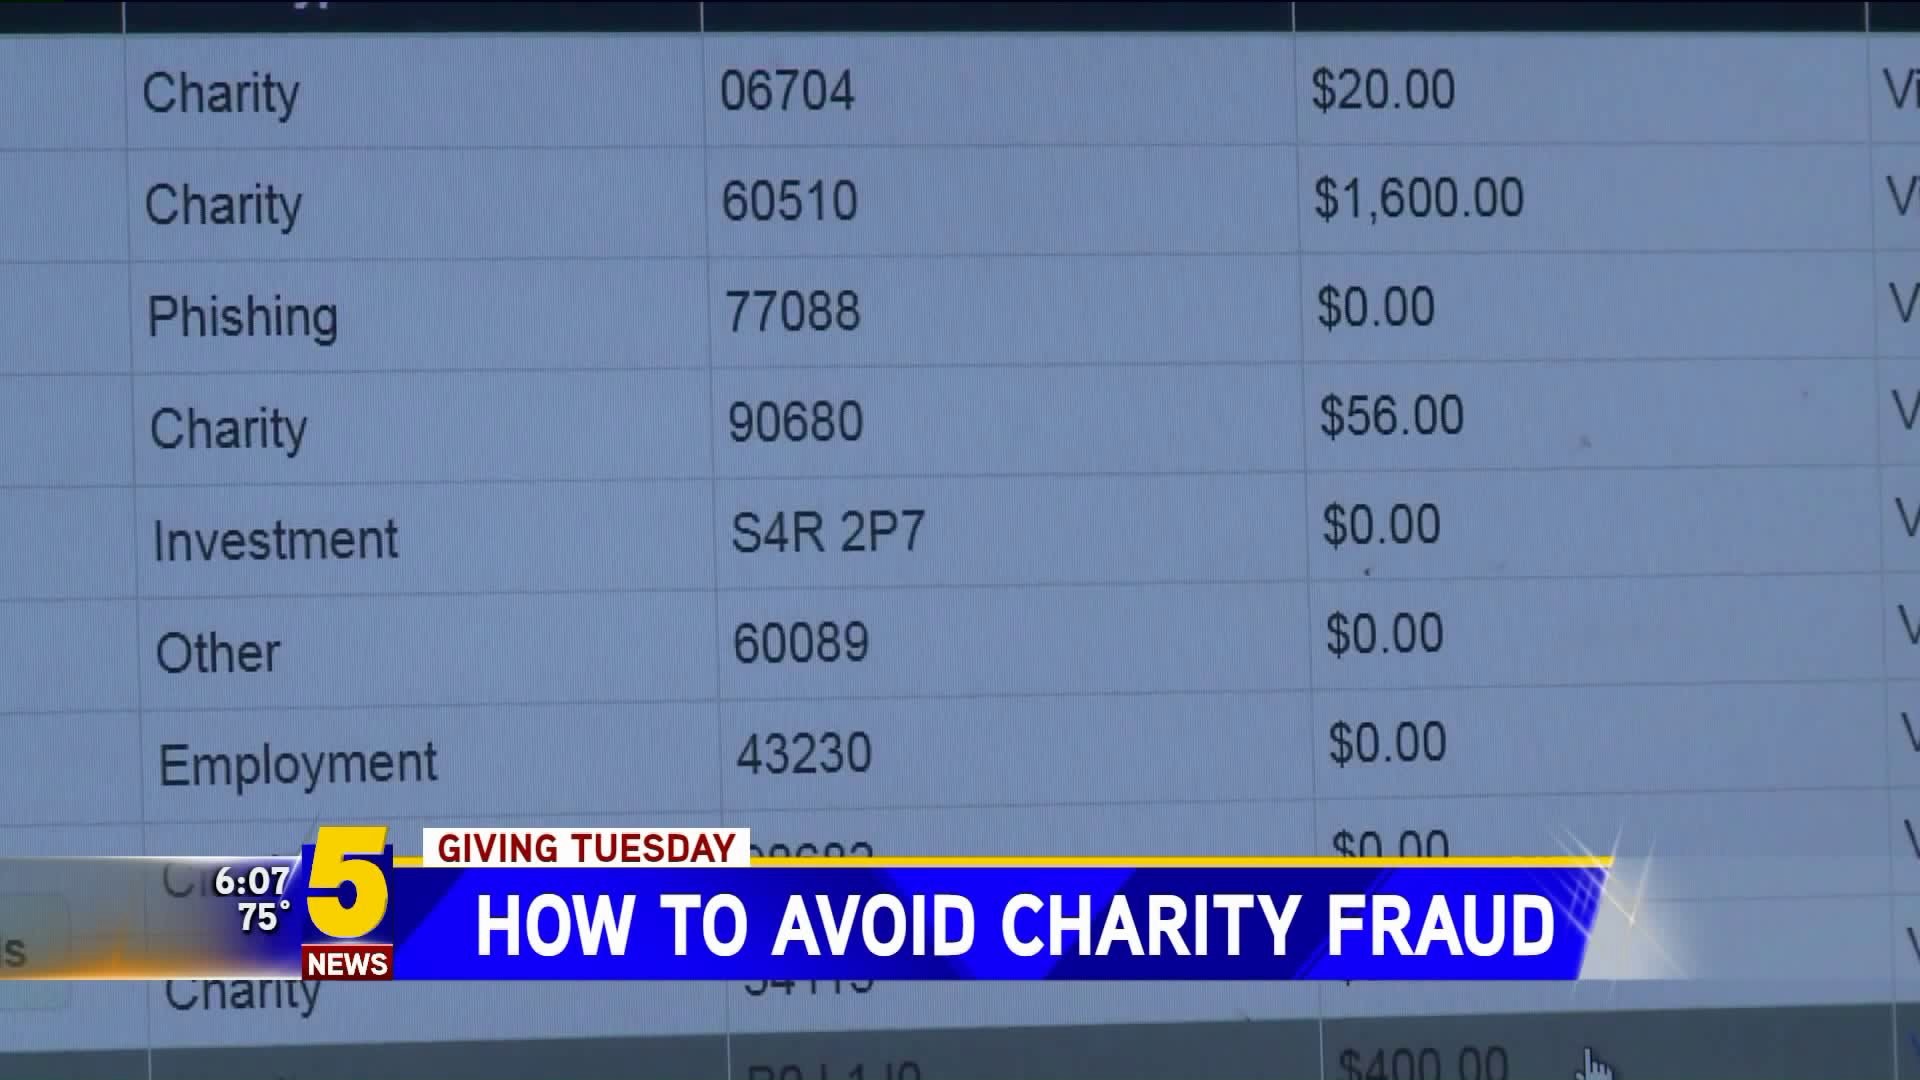 How To Avoid Charity Fraud